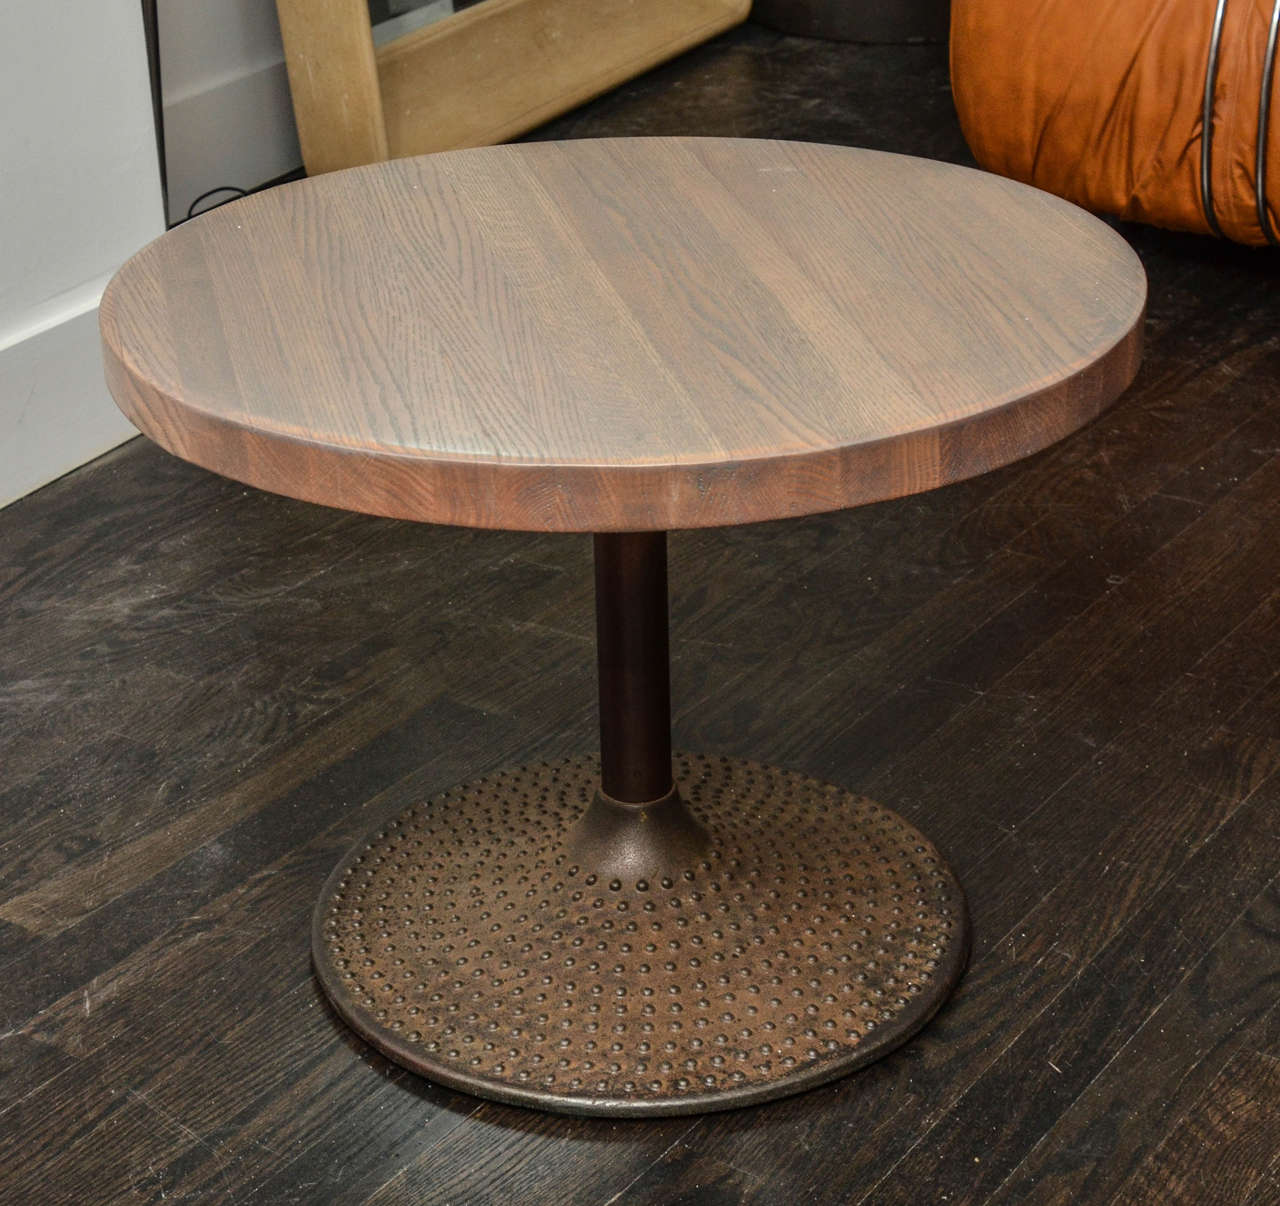 Hobnailed patinated bronze based side tables with round bleached oak tops.